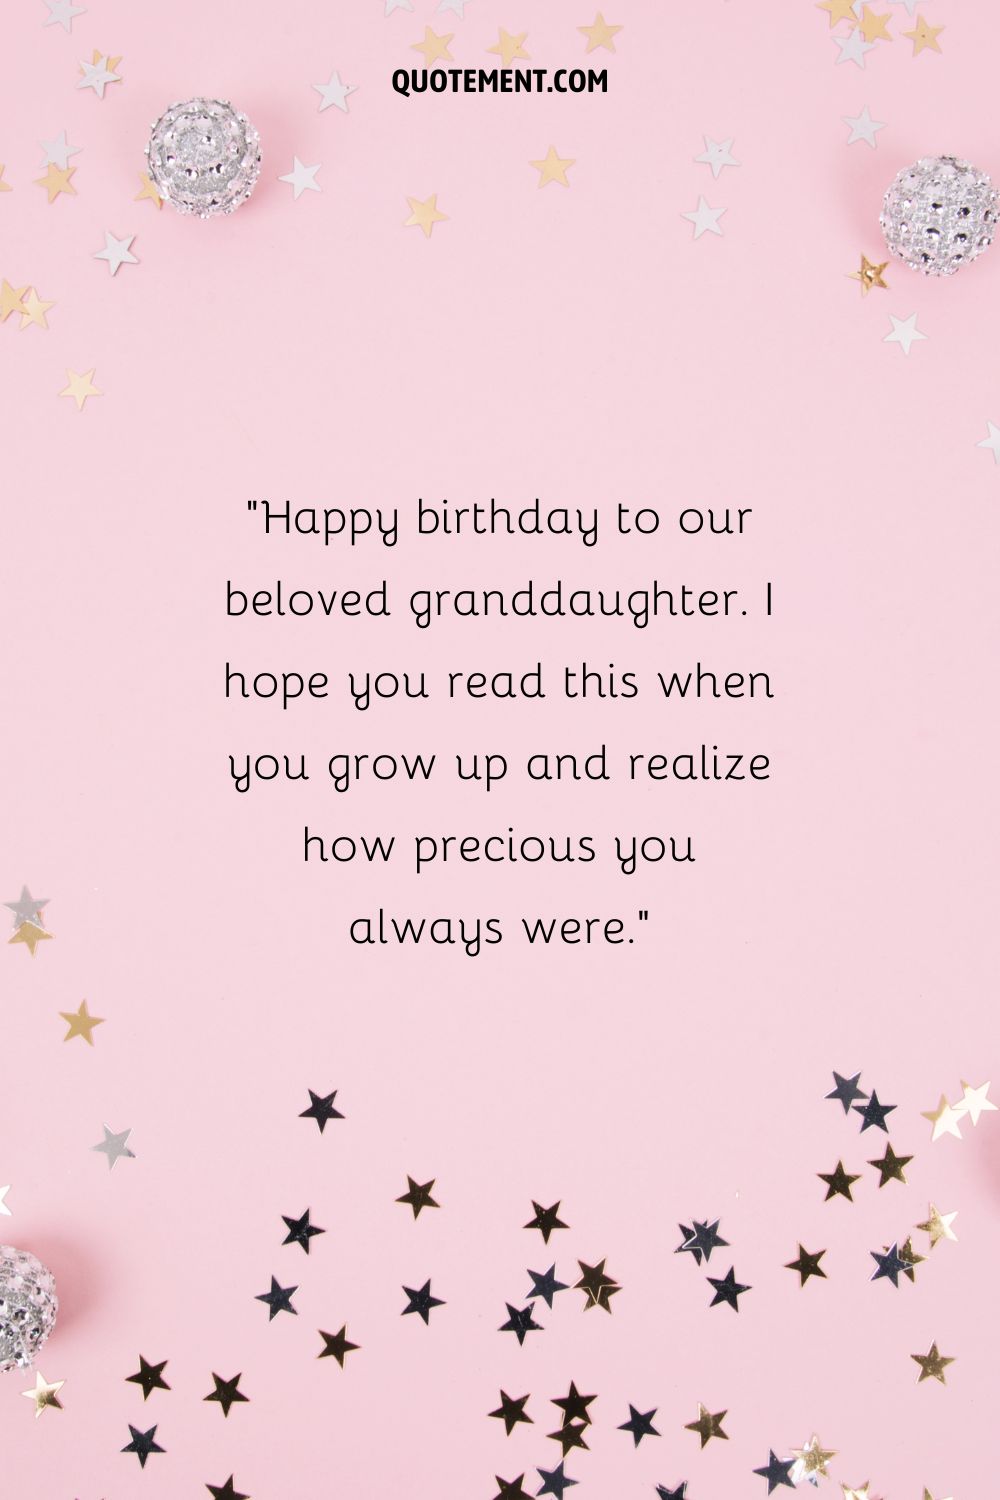 4th birthday granddaughter image represented by pink glitter, confetti and decorations